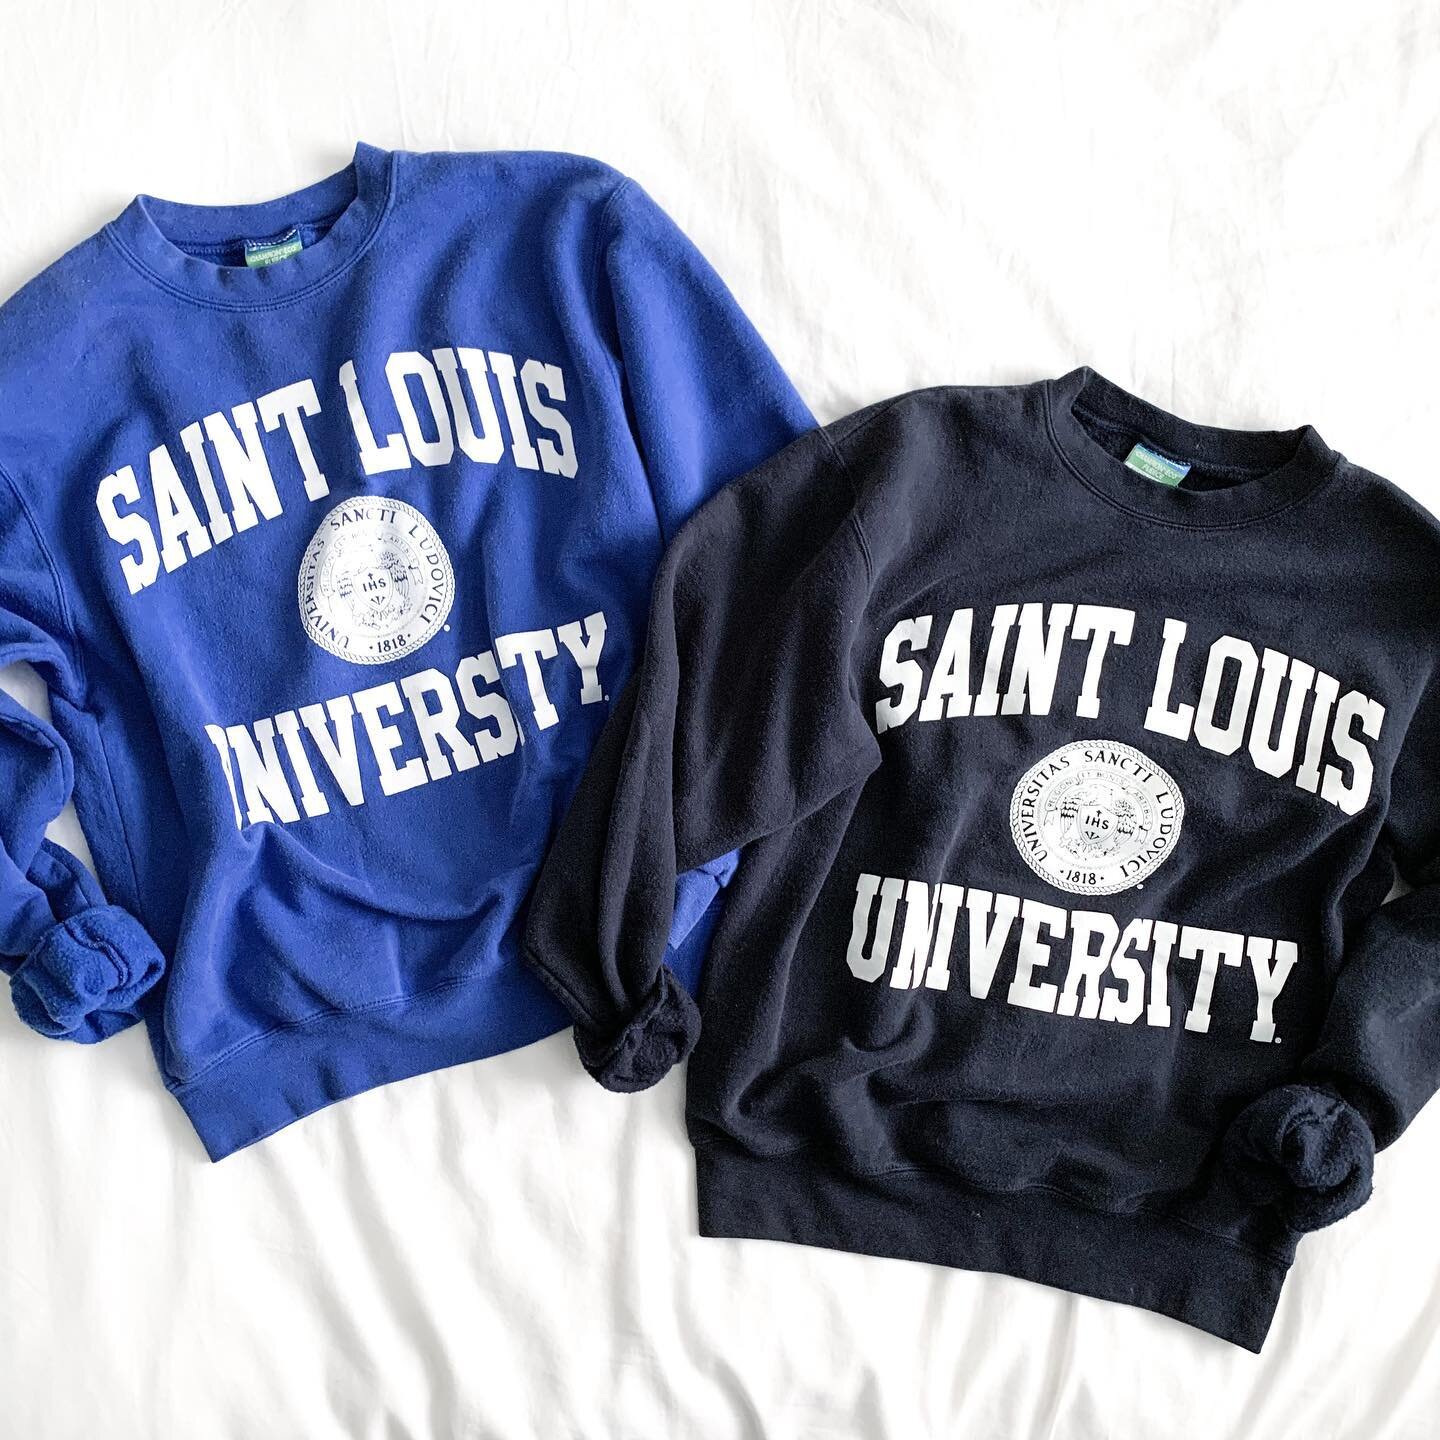 It&rsquo;s not often I render Dan speechless with my thrift finds, but these did the trick! Two vintage Champion sweatshirts from his alma mater, St. Louis University.